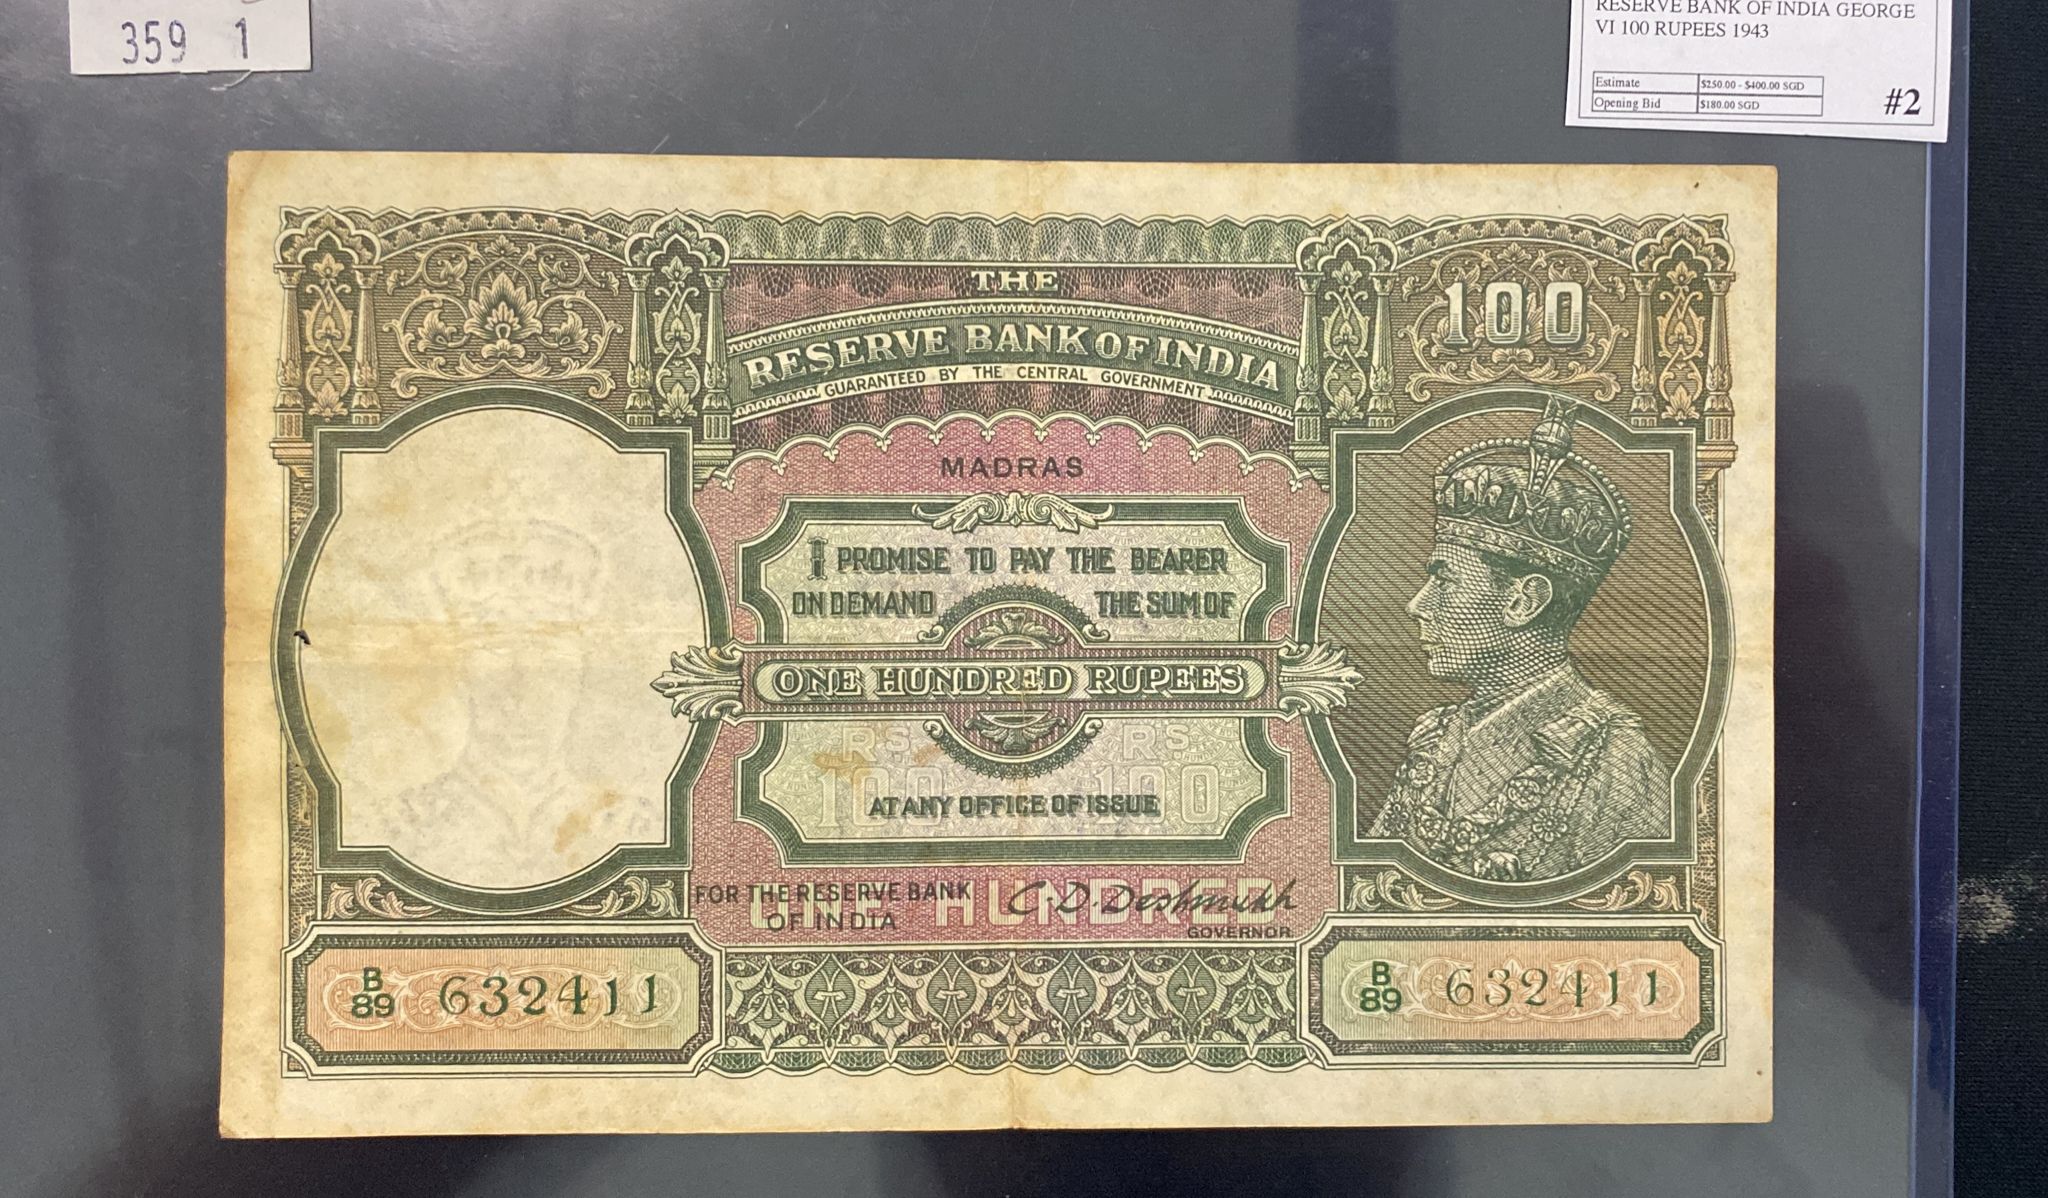 RESERVE BANK OF INDIA GEORGE VI 100 RUPEES 1943 - Image 3 of 4